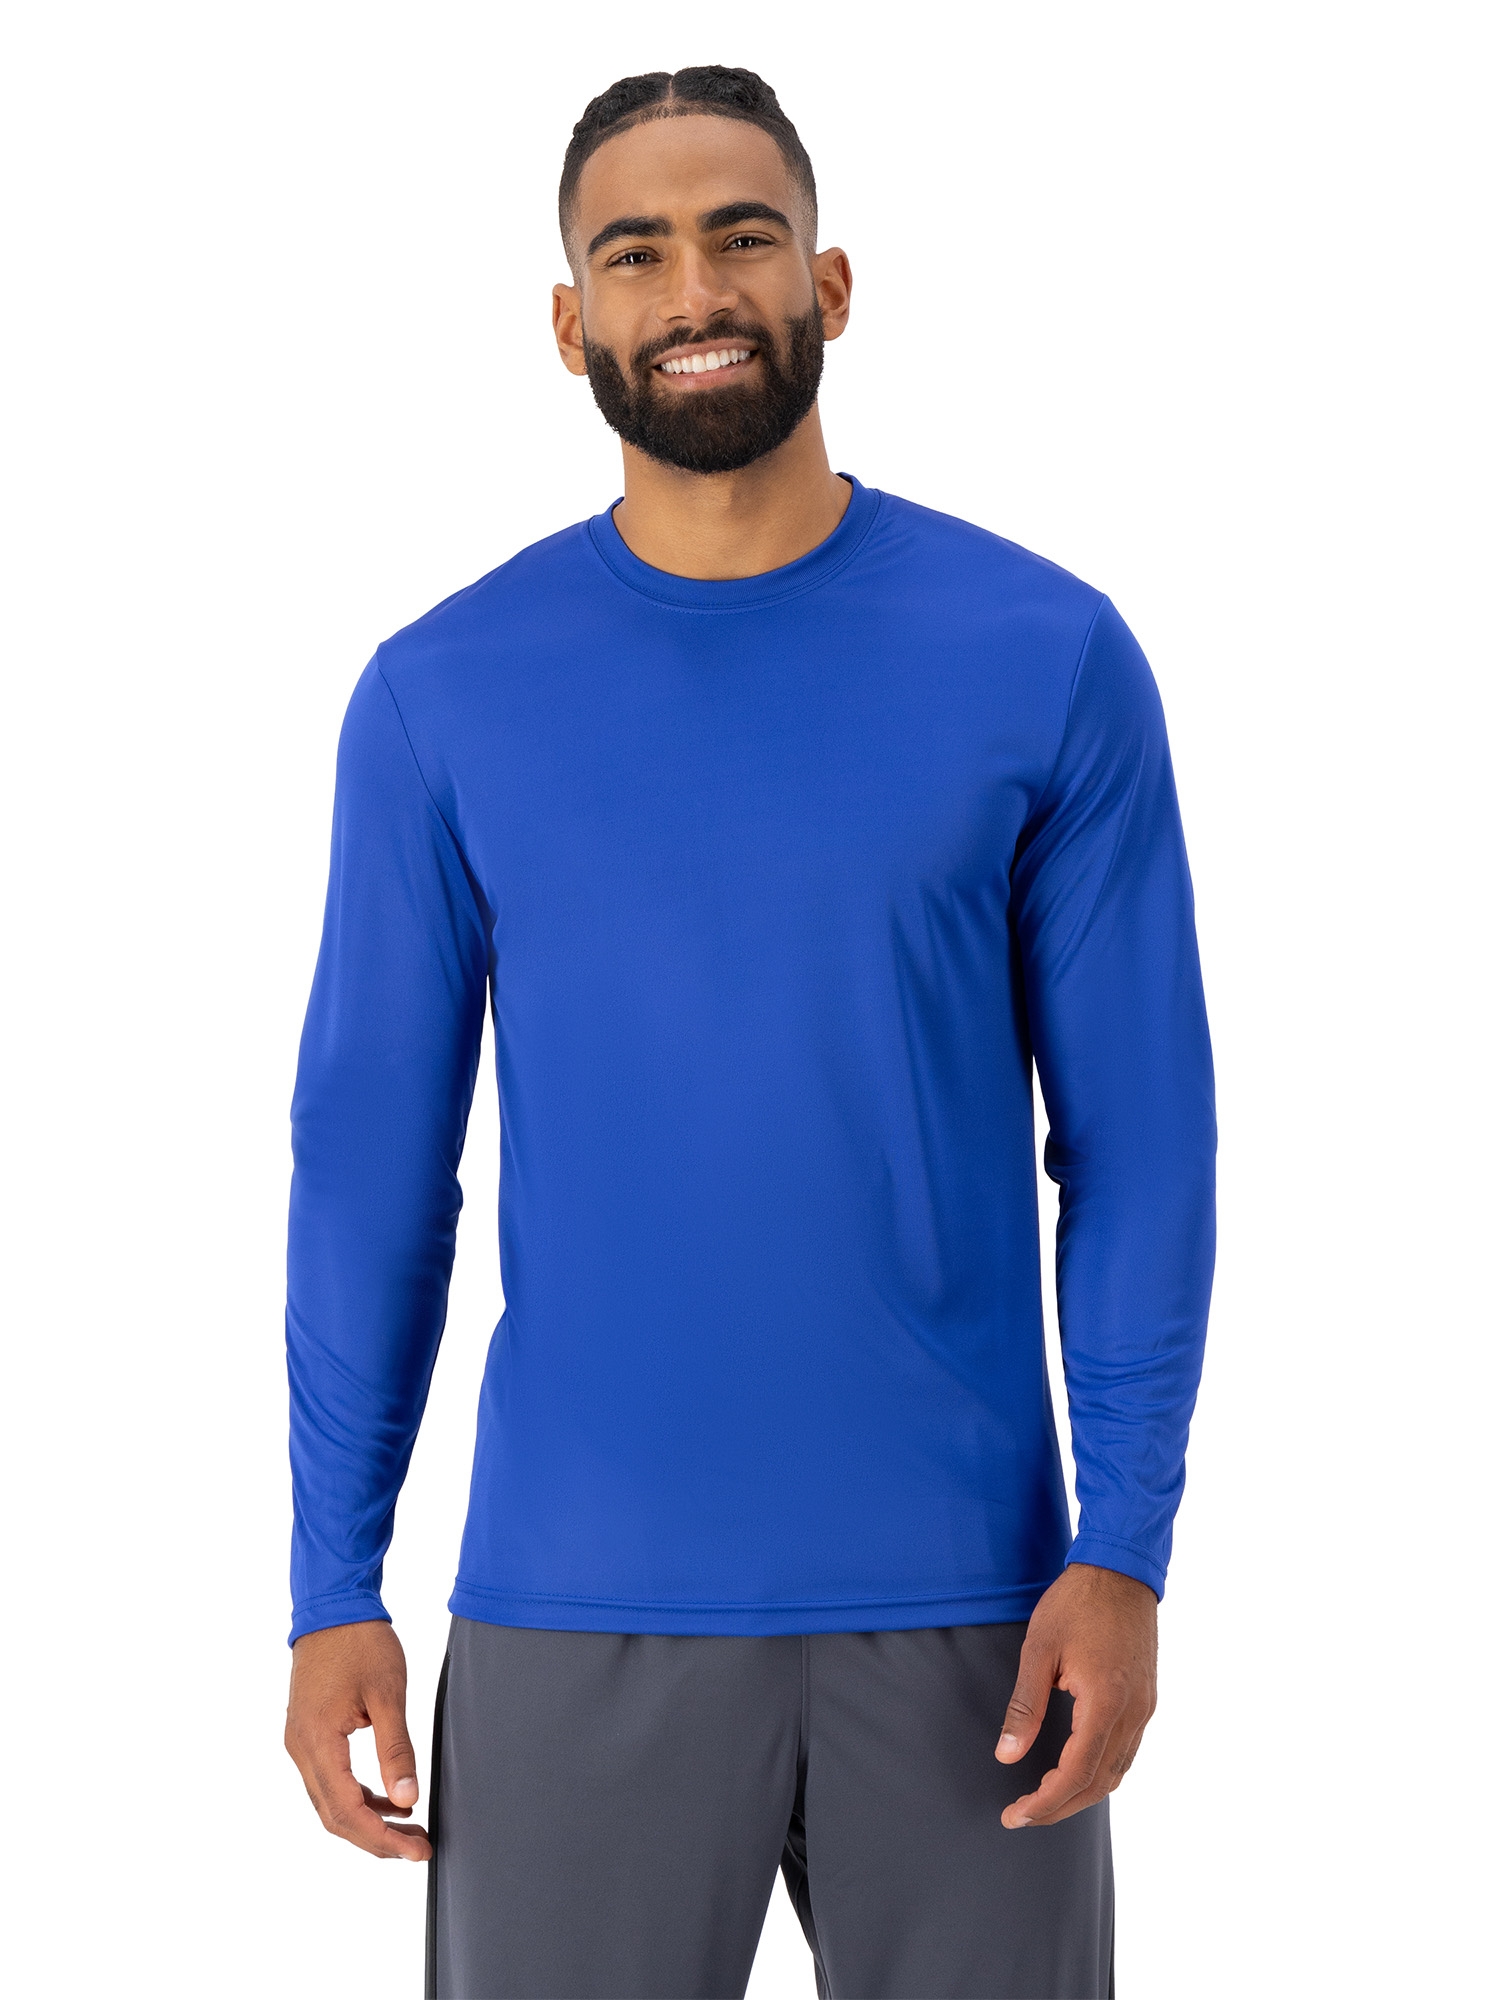 Hanes Men's and Big Men's Cool Dri Performance Long Sleeve T-Shirt (40+ UPF), Up to Size 3XL - image 1 of 8